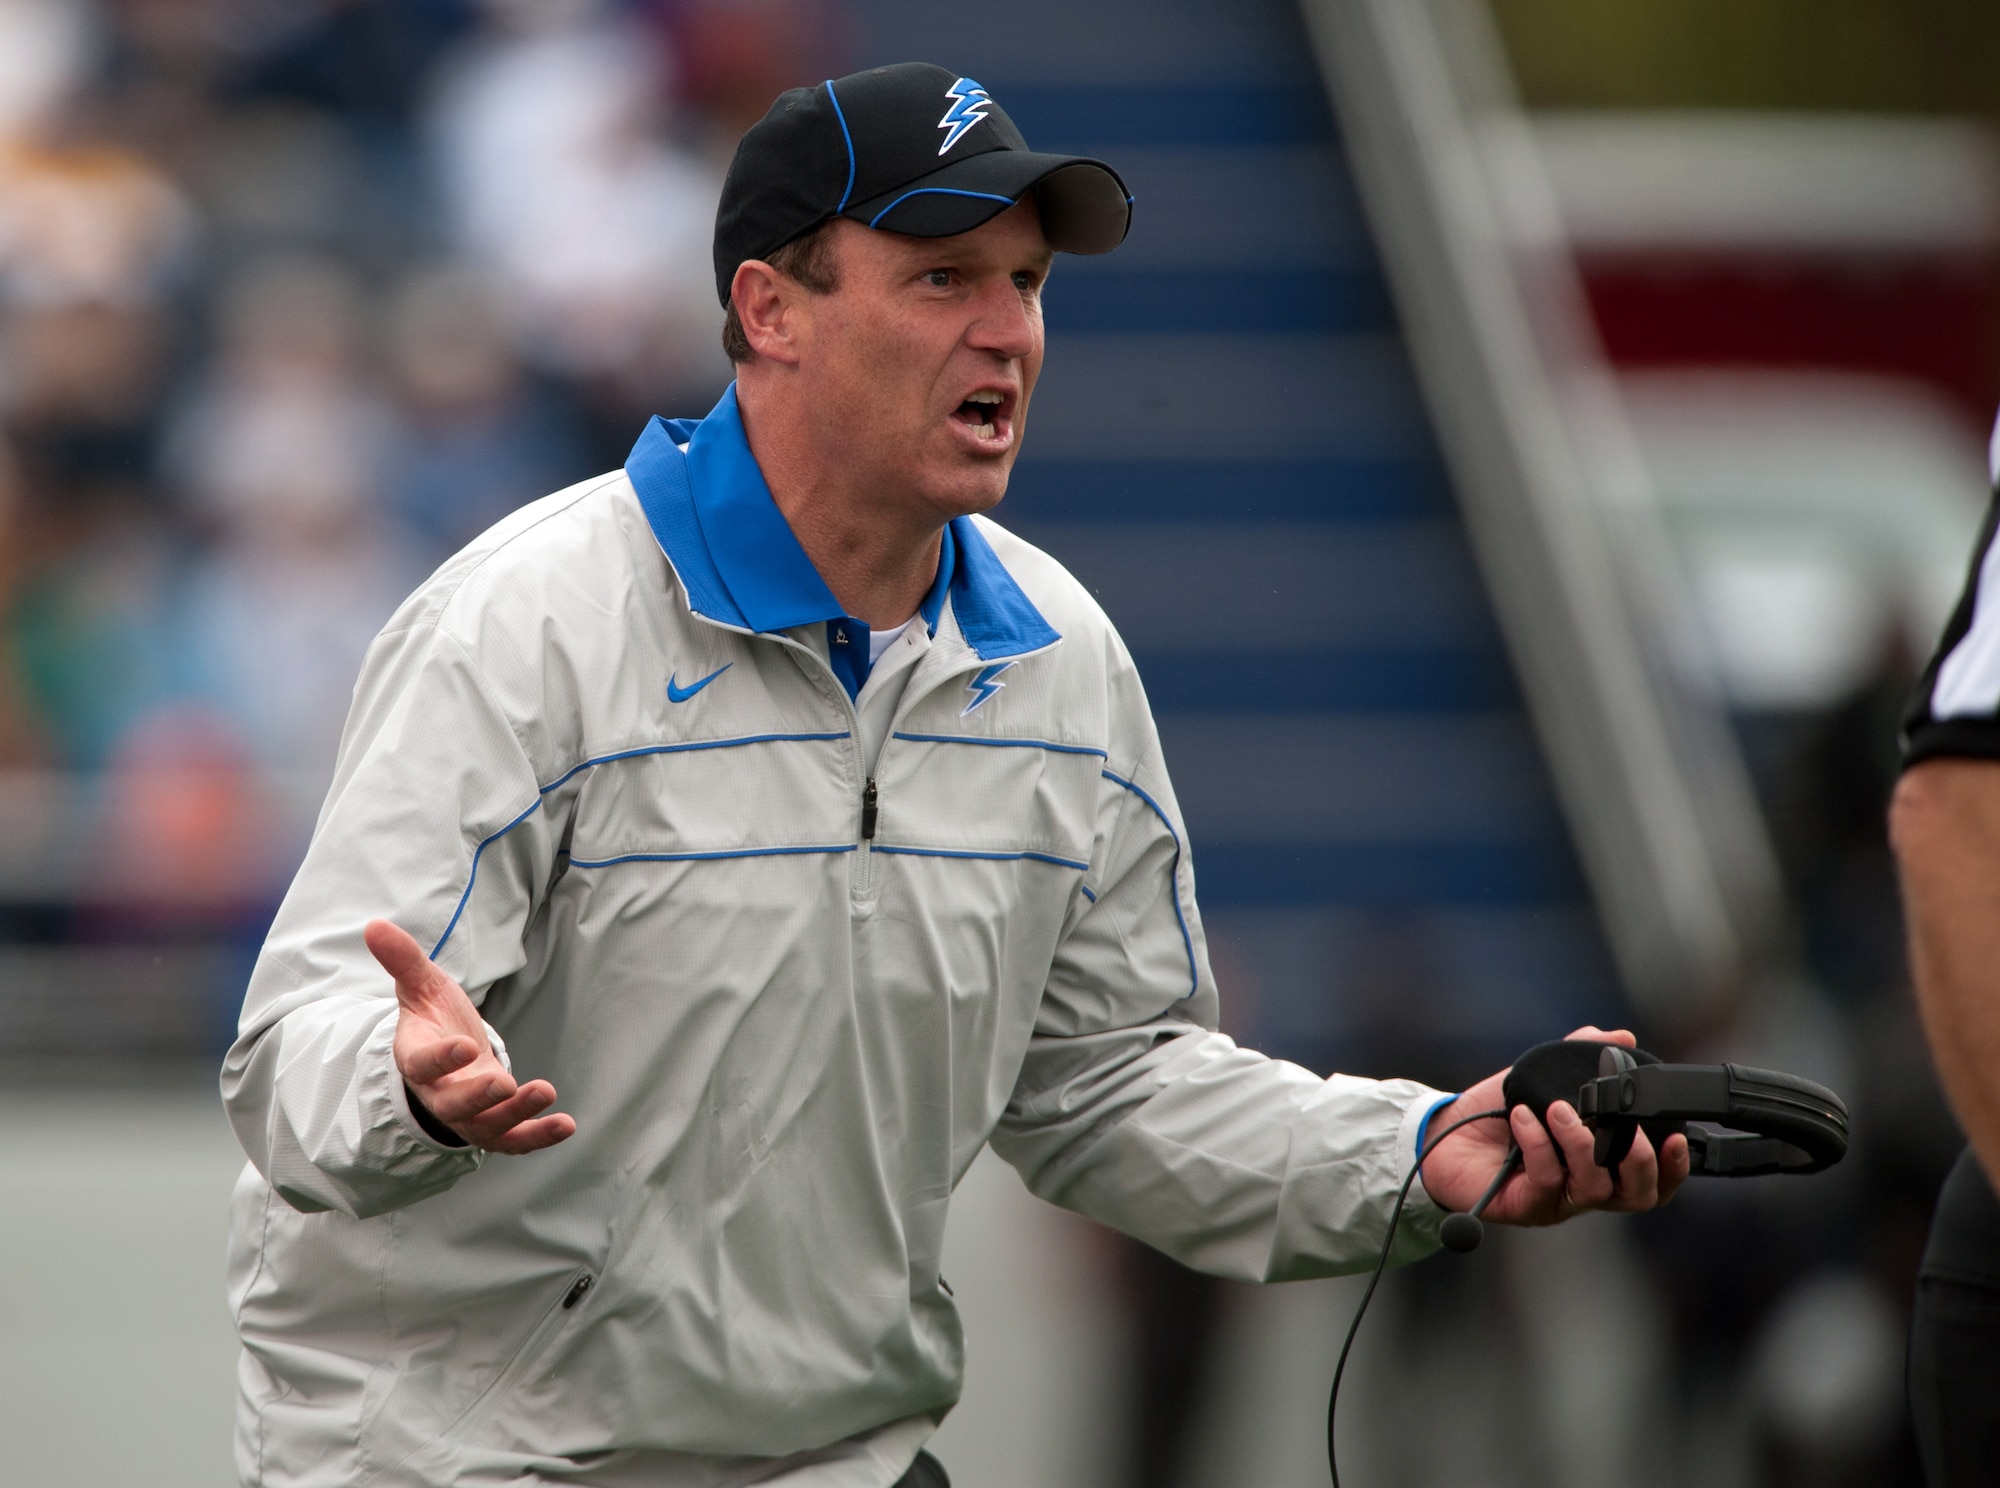 Air Force coach Troy Calhoun tries to motivate his team as the Falcons take on the Midshipmen of Navy Saturday, Oct. 1, 2011 at the Naval Academy's Jack Stephens Field. The Falcons dominated the first half, but almost let go of the game in the second after the Mids outscored them 25-7. The Falcons won 35-34 in overtime after the Mids kicker Jon Teague missed their point after attempt.  (U.S. Air Force photo/Russ Scalf)